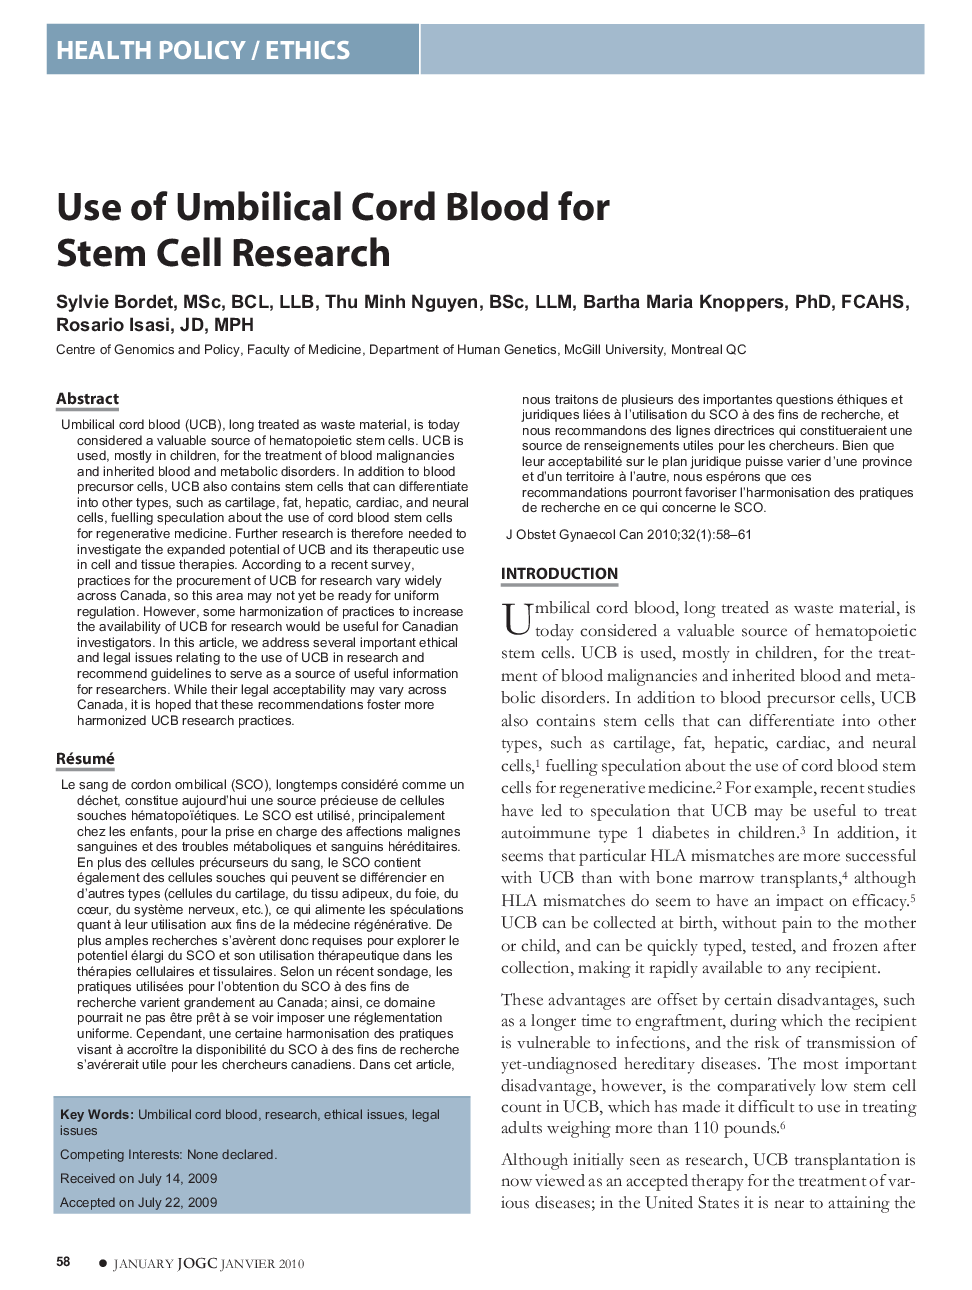 Use of Umbilical Cord Blood for Stem Cell Research